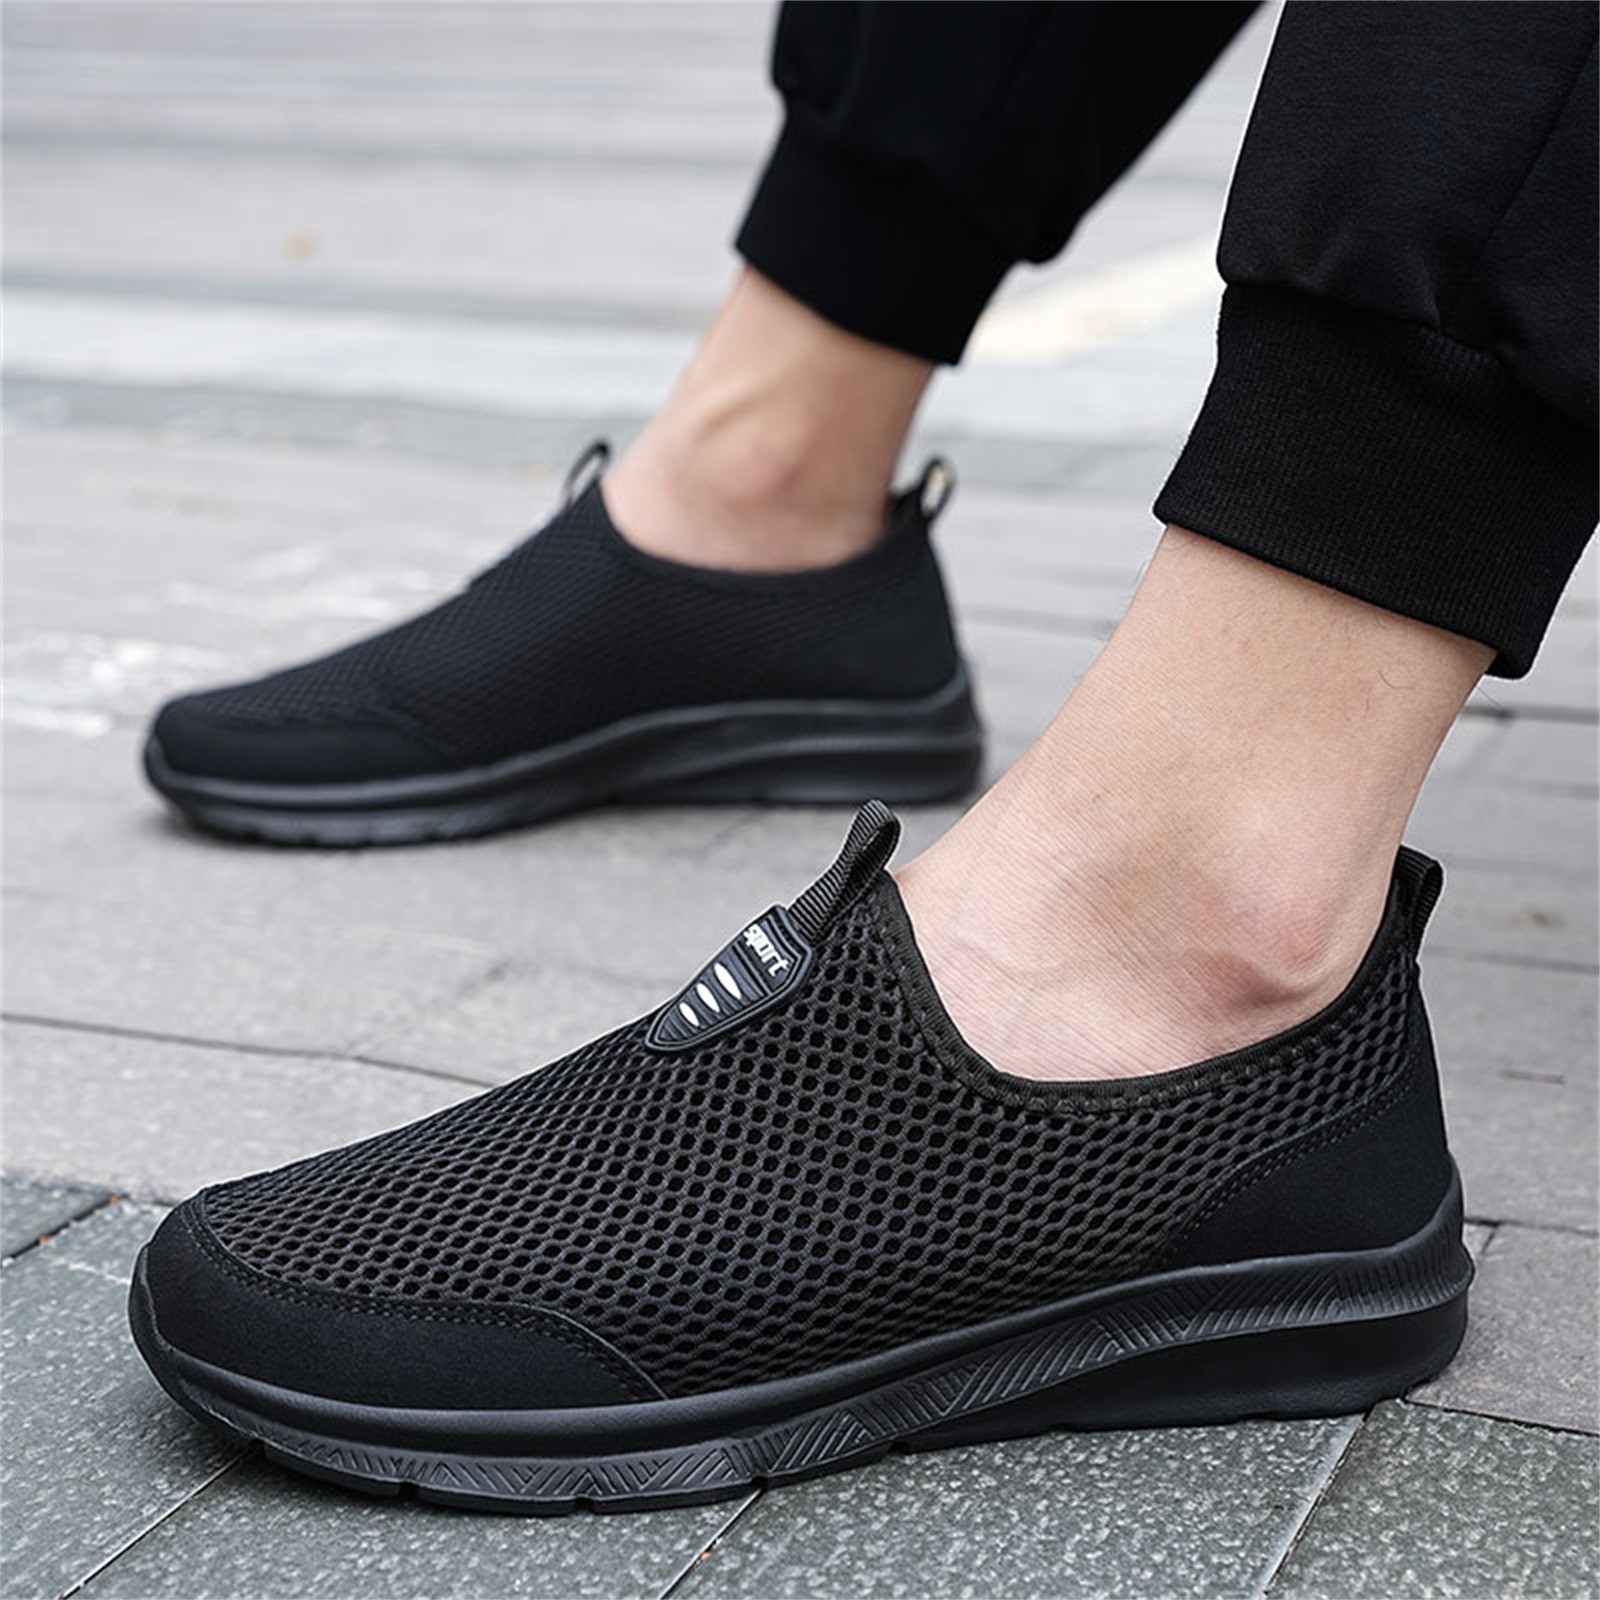 CBGELRT Shoes for Men Casual Men's Sneakers Tennis Shoes Men Fashion Summer Men Sneakers Breathable Mesh Shallow Lace up Casual Shoes Male Black 48 - image 2 of 9